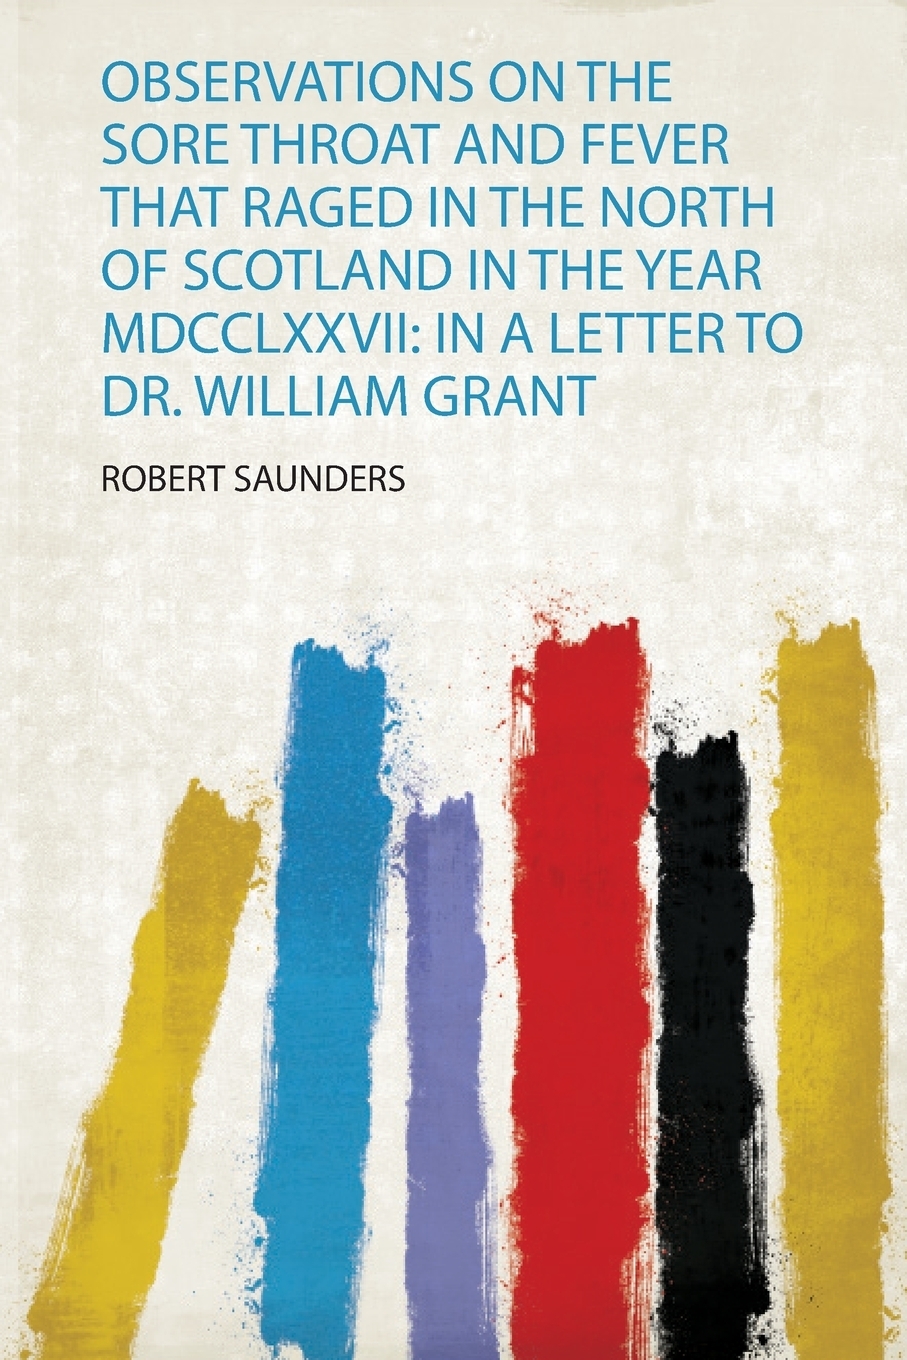 Observations on the Sore Throat and Fever That Raged in the North of Scotland in the Year Mdcclxxvii. in a Letter to Dr. William Grant